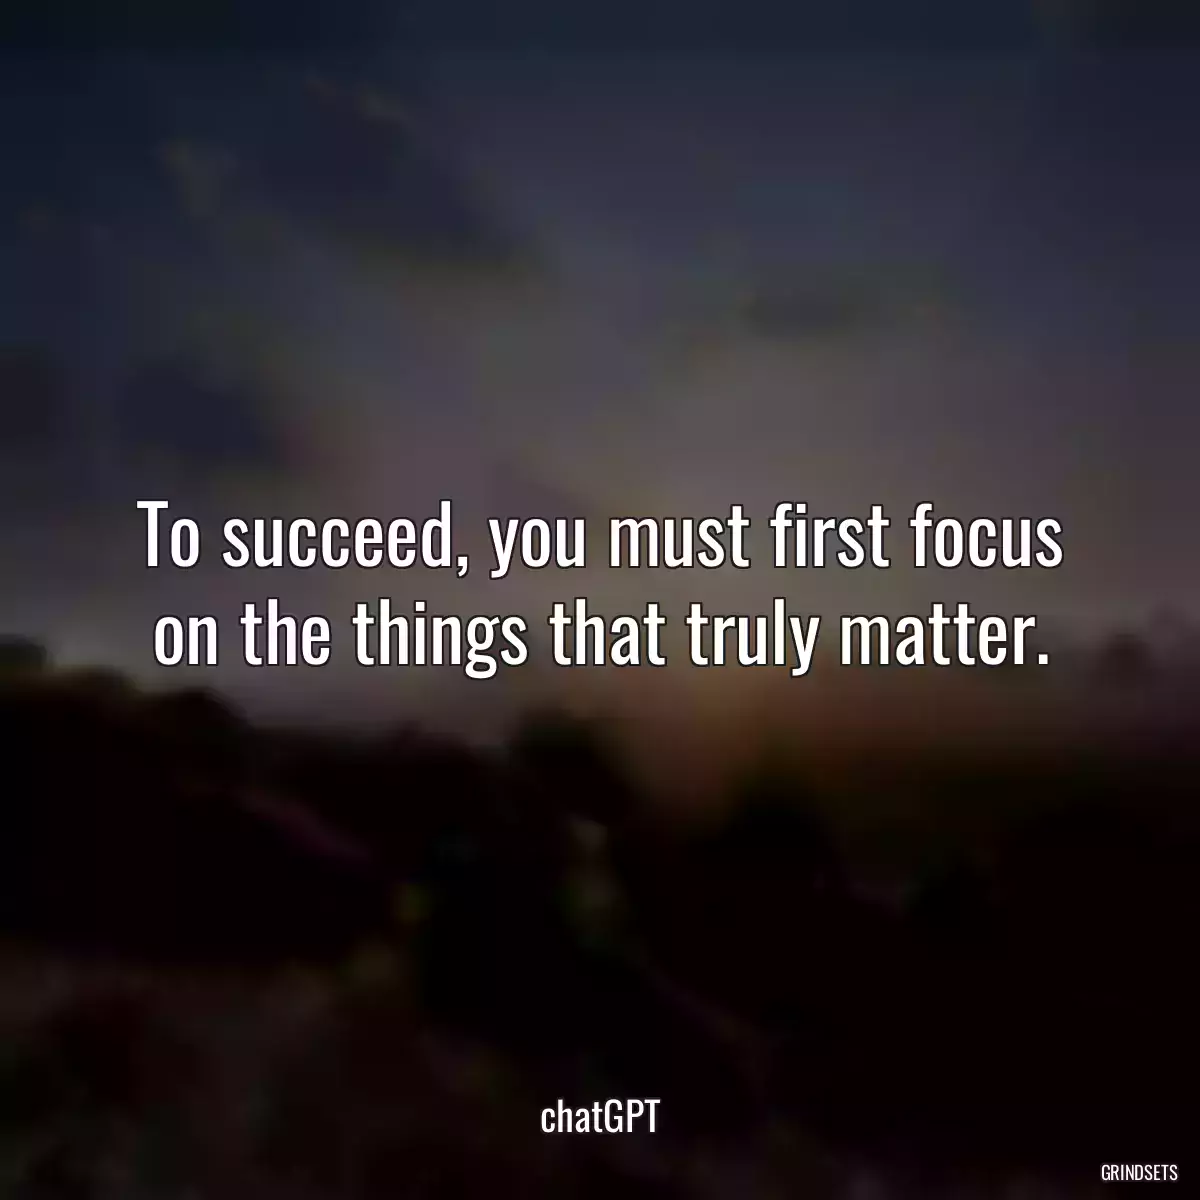 To succeed, you must first focus on the things that truly matter.